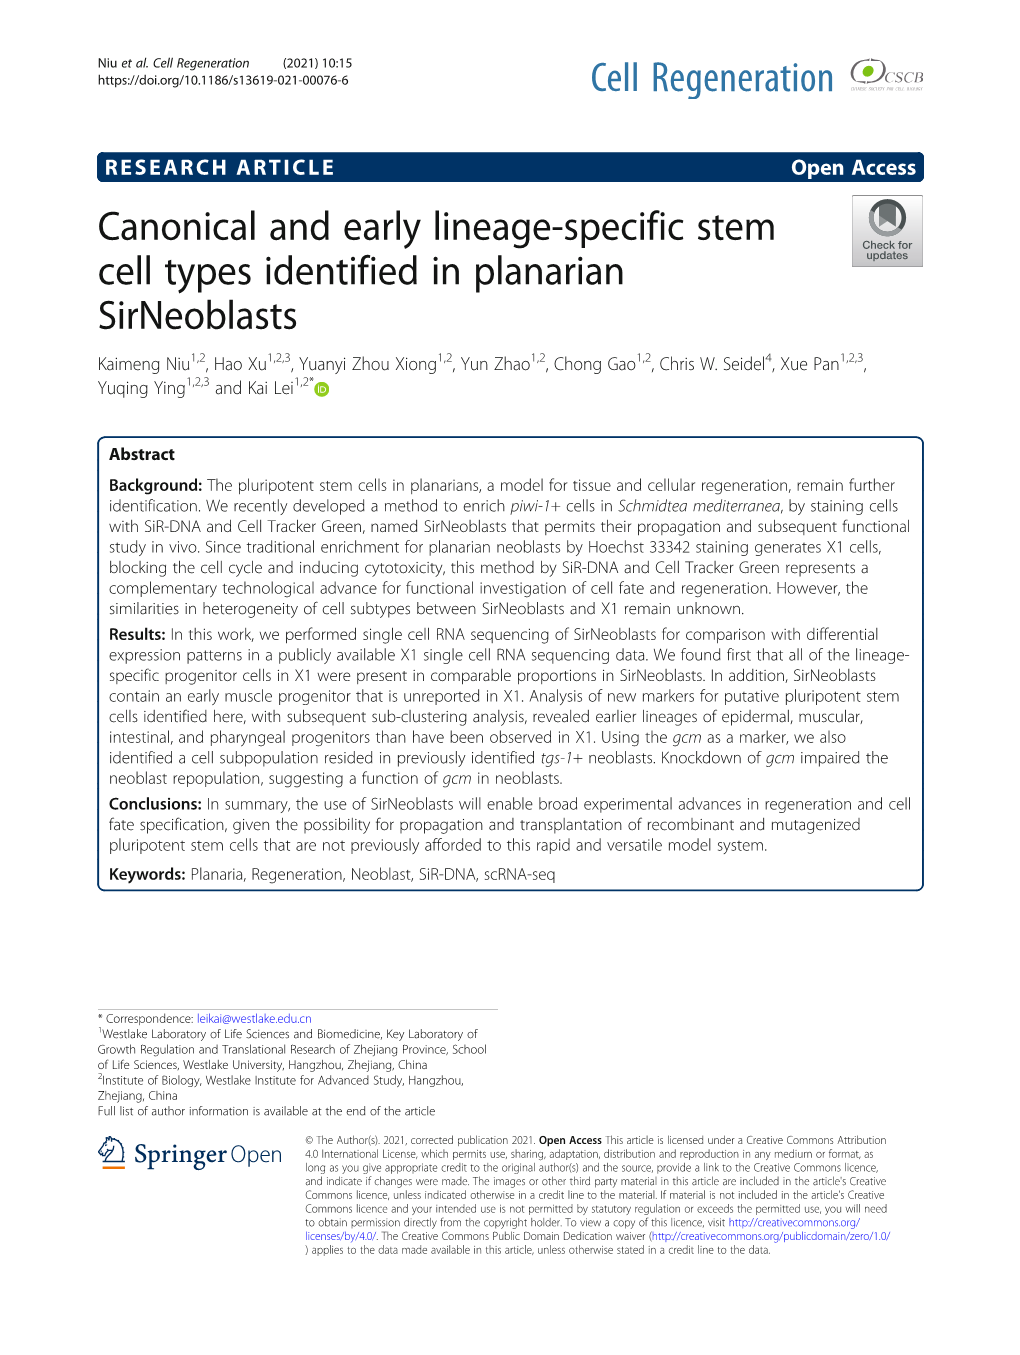 Canonical and Early Lineage-Specific Stem Cell Types